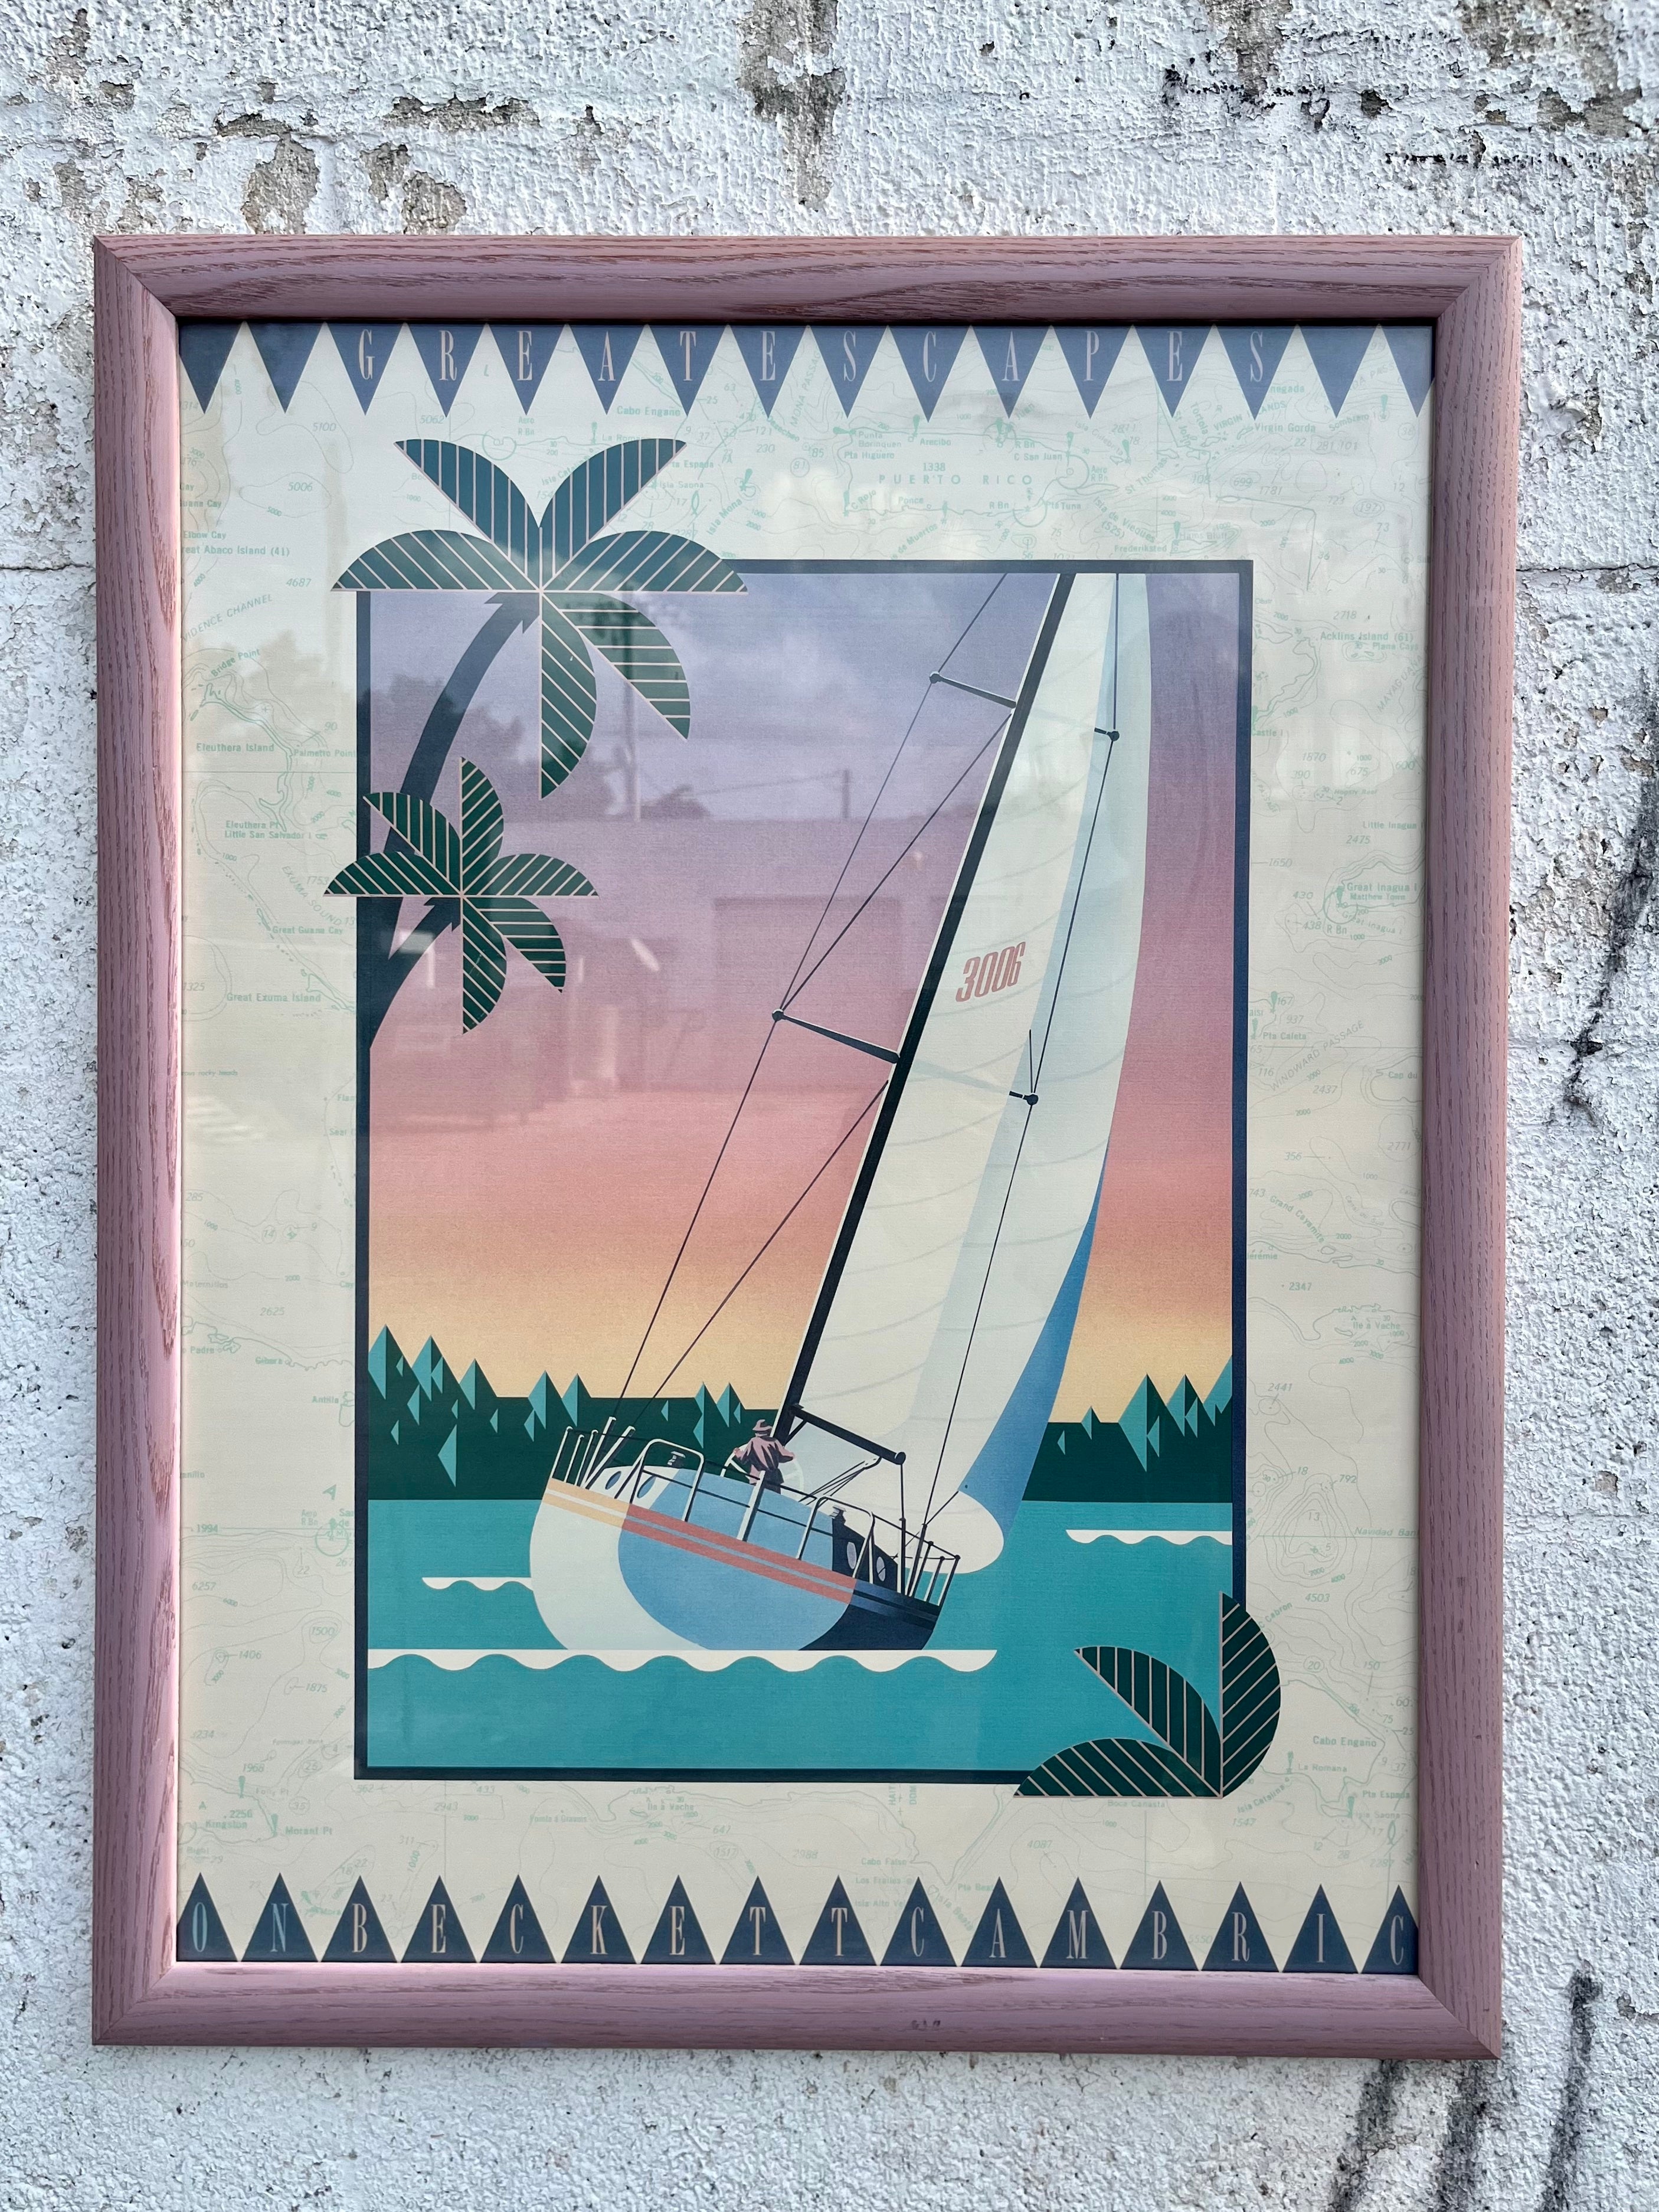 Vintage Postmodern /1980s Art Deco Revival Inspired Great Escapes on Beckett Cambric Paper Framed Print. 
Features the image of a sealing boat superposed over a Caribbean Sea Cartography Map, protected with a glass, and framed with a light purple